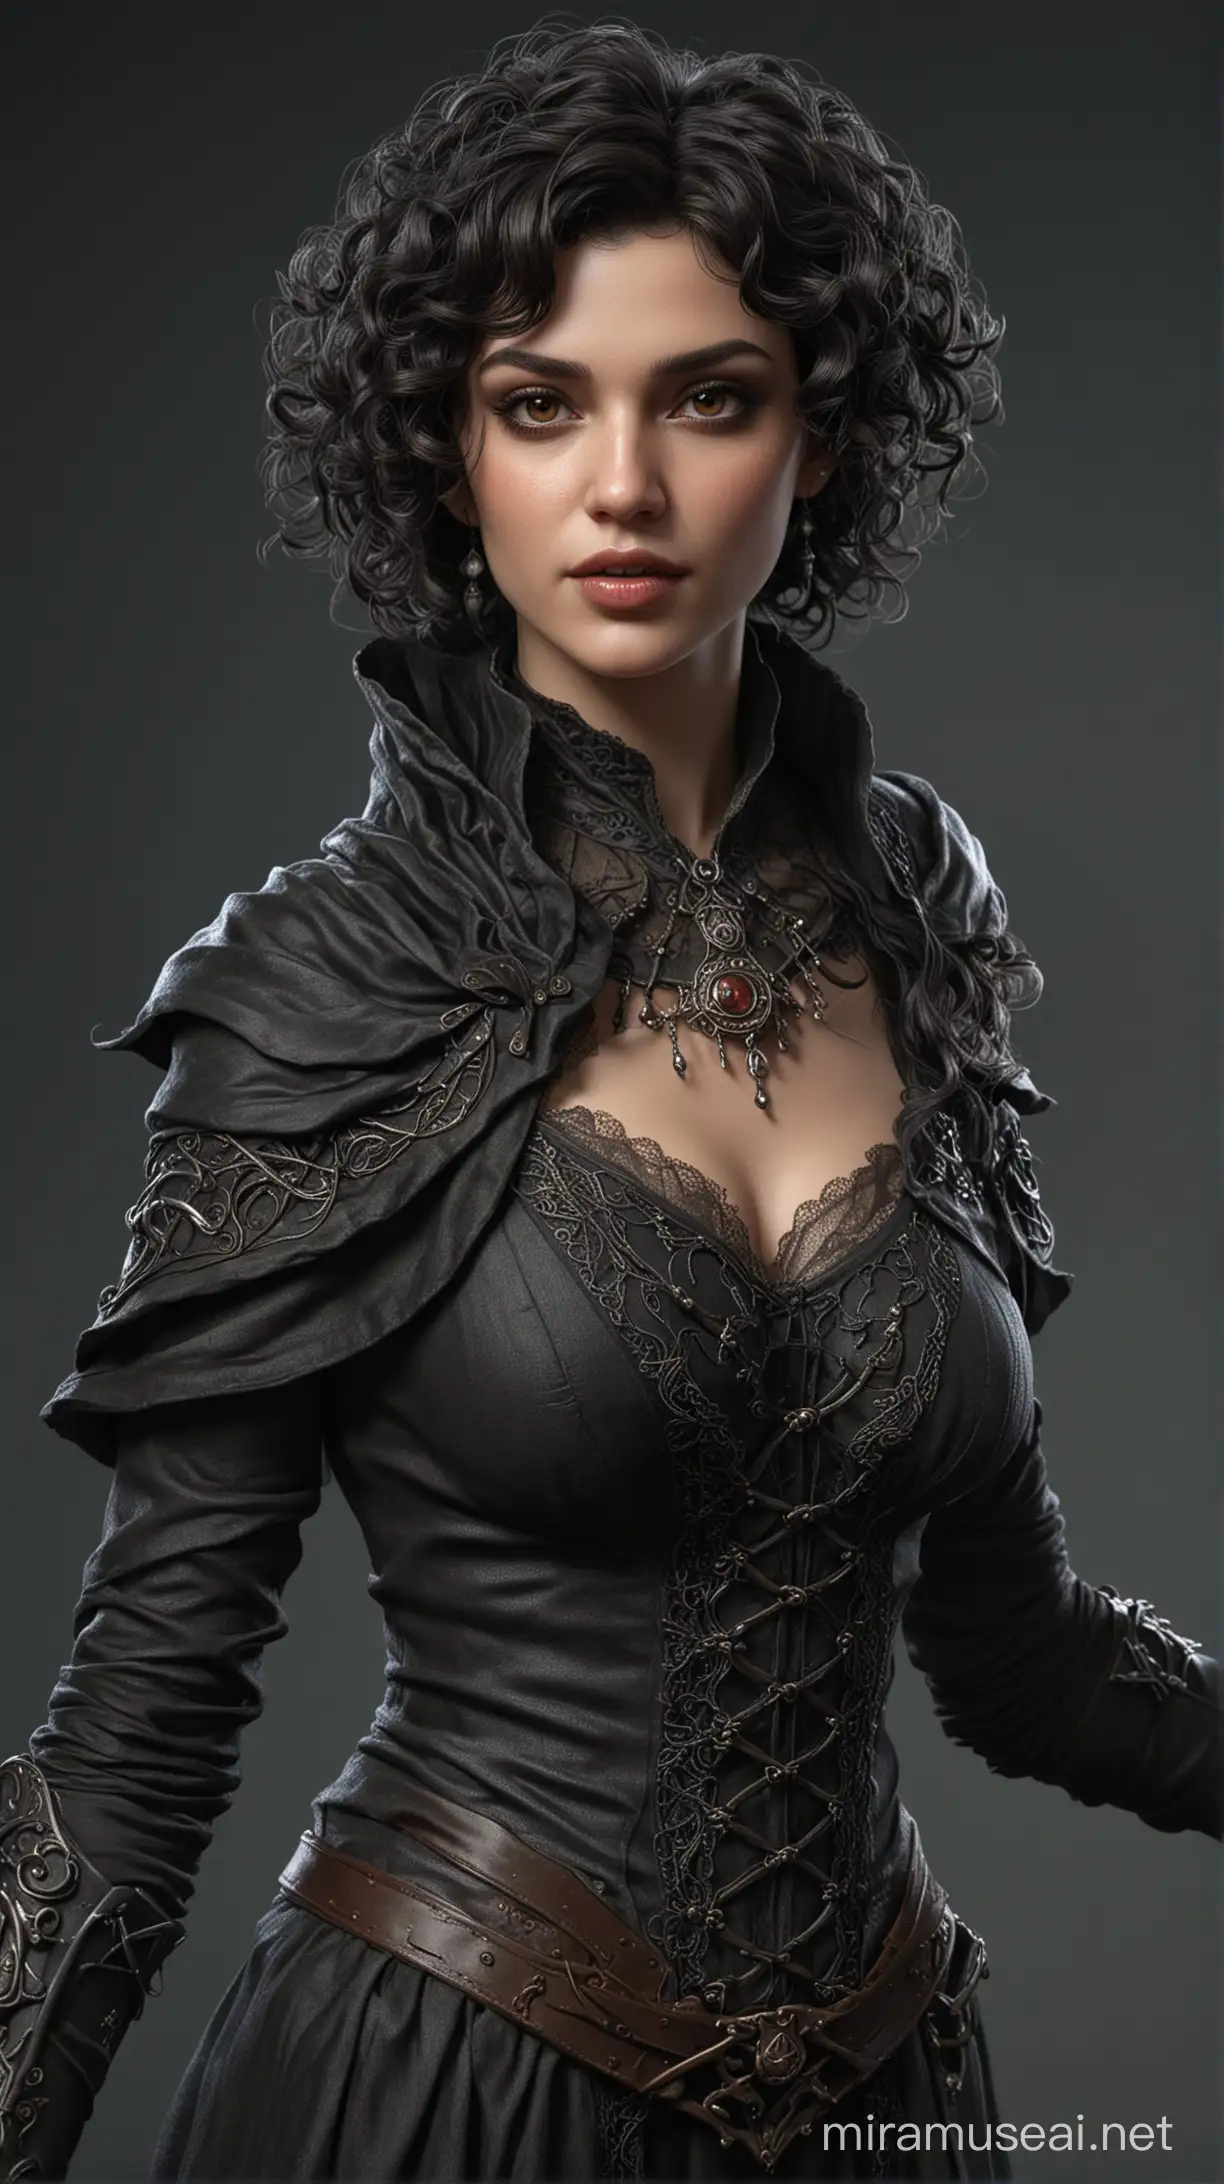 Beautiful Female Necromancer Wizard with Curly Hair and Brown Eyes